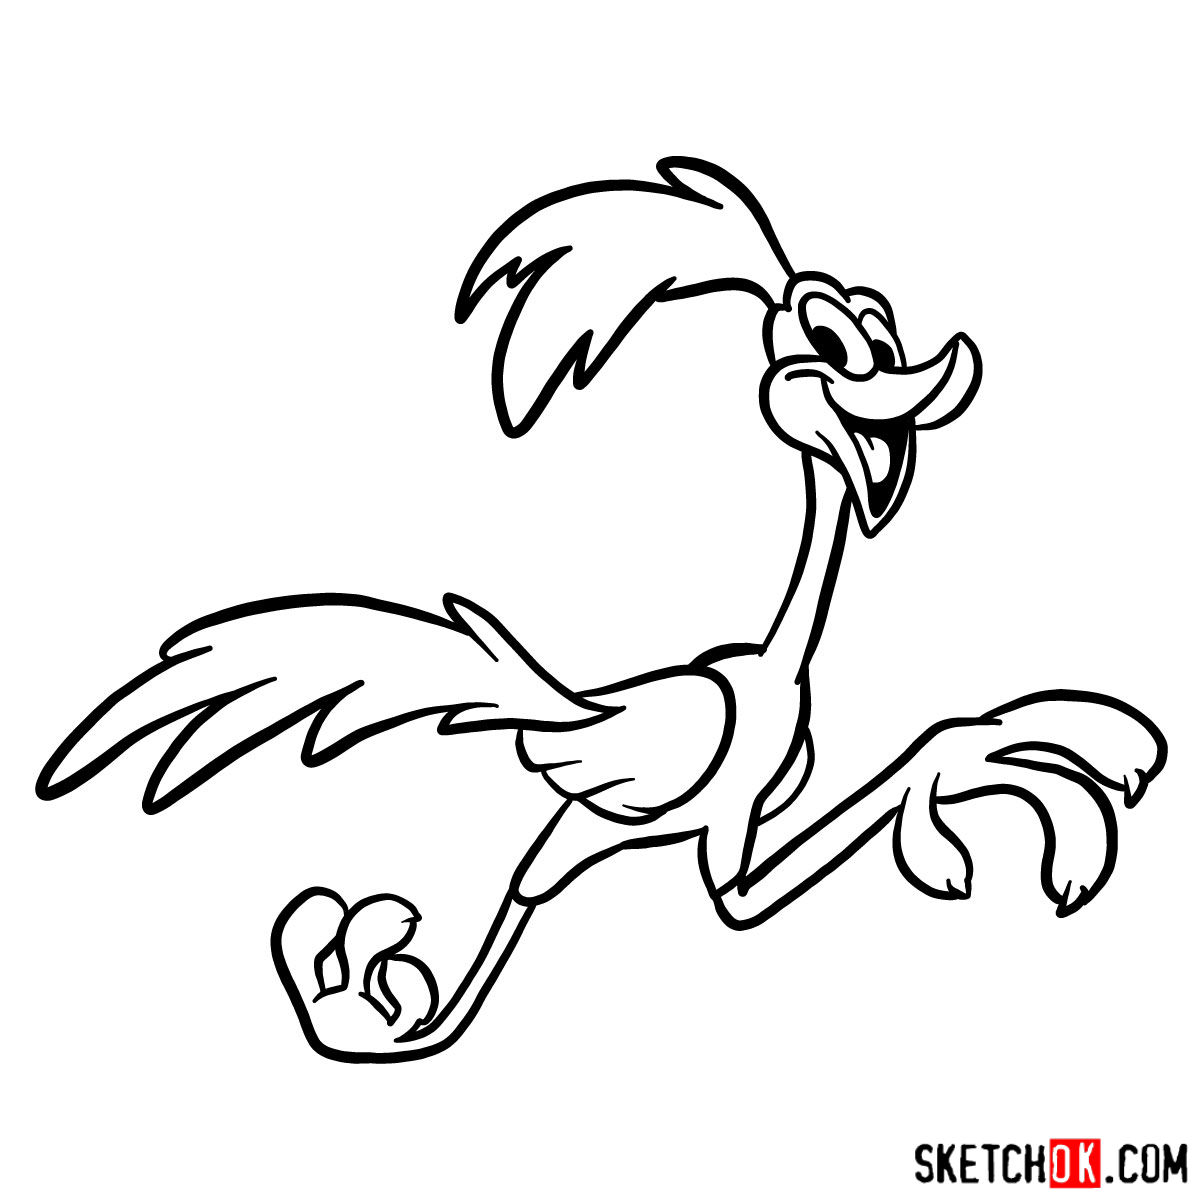 How To Draw Road Runner - Road Runner Cartoon Drawing. 